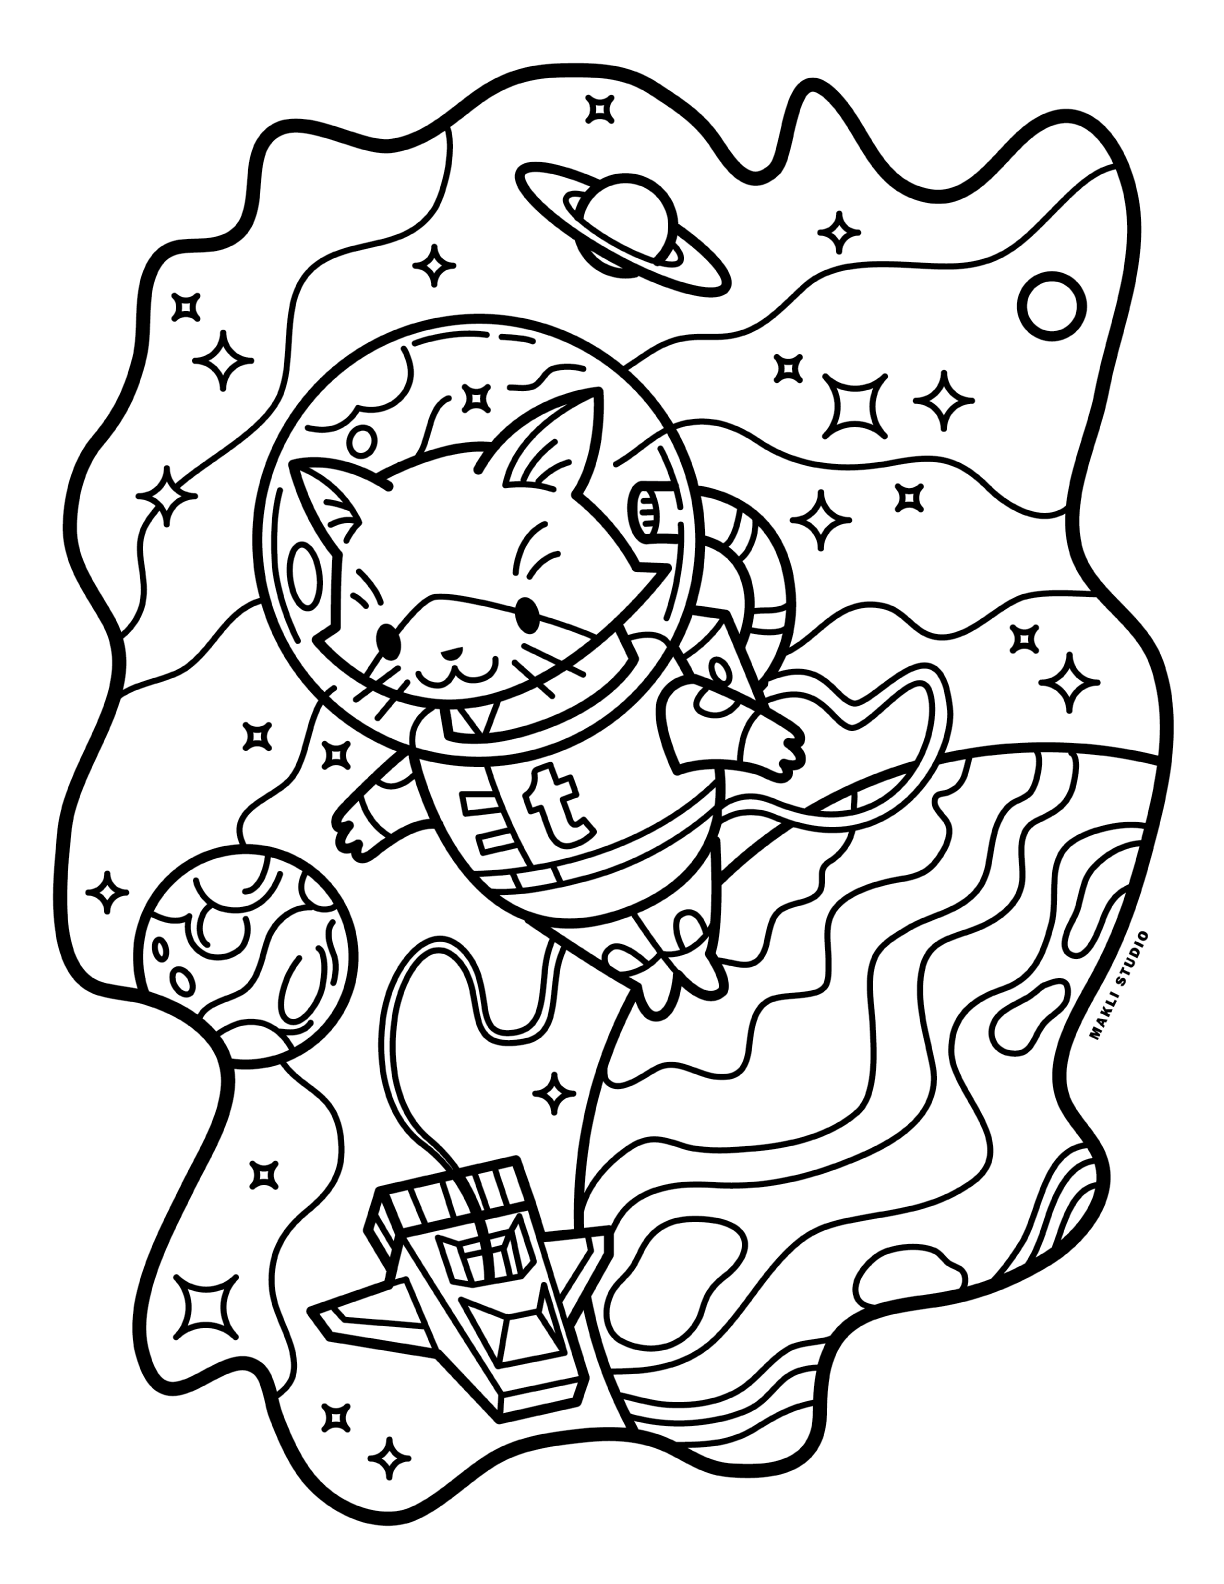 Matt Klimas — Recently made a set of coloring pages for a...